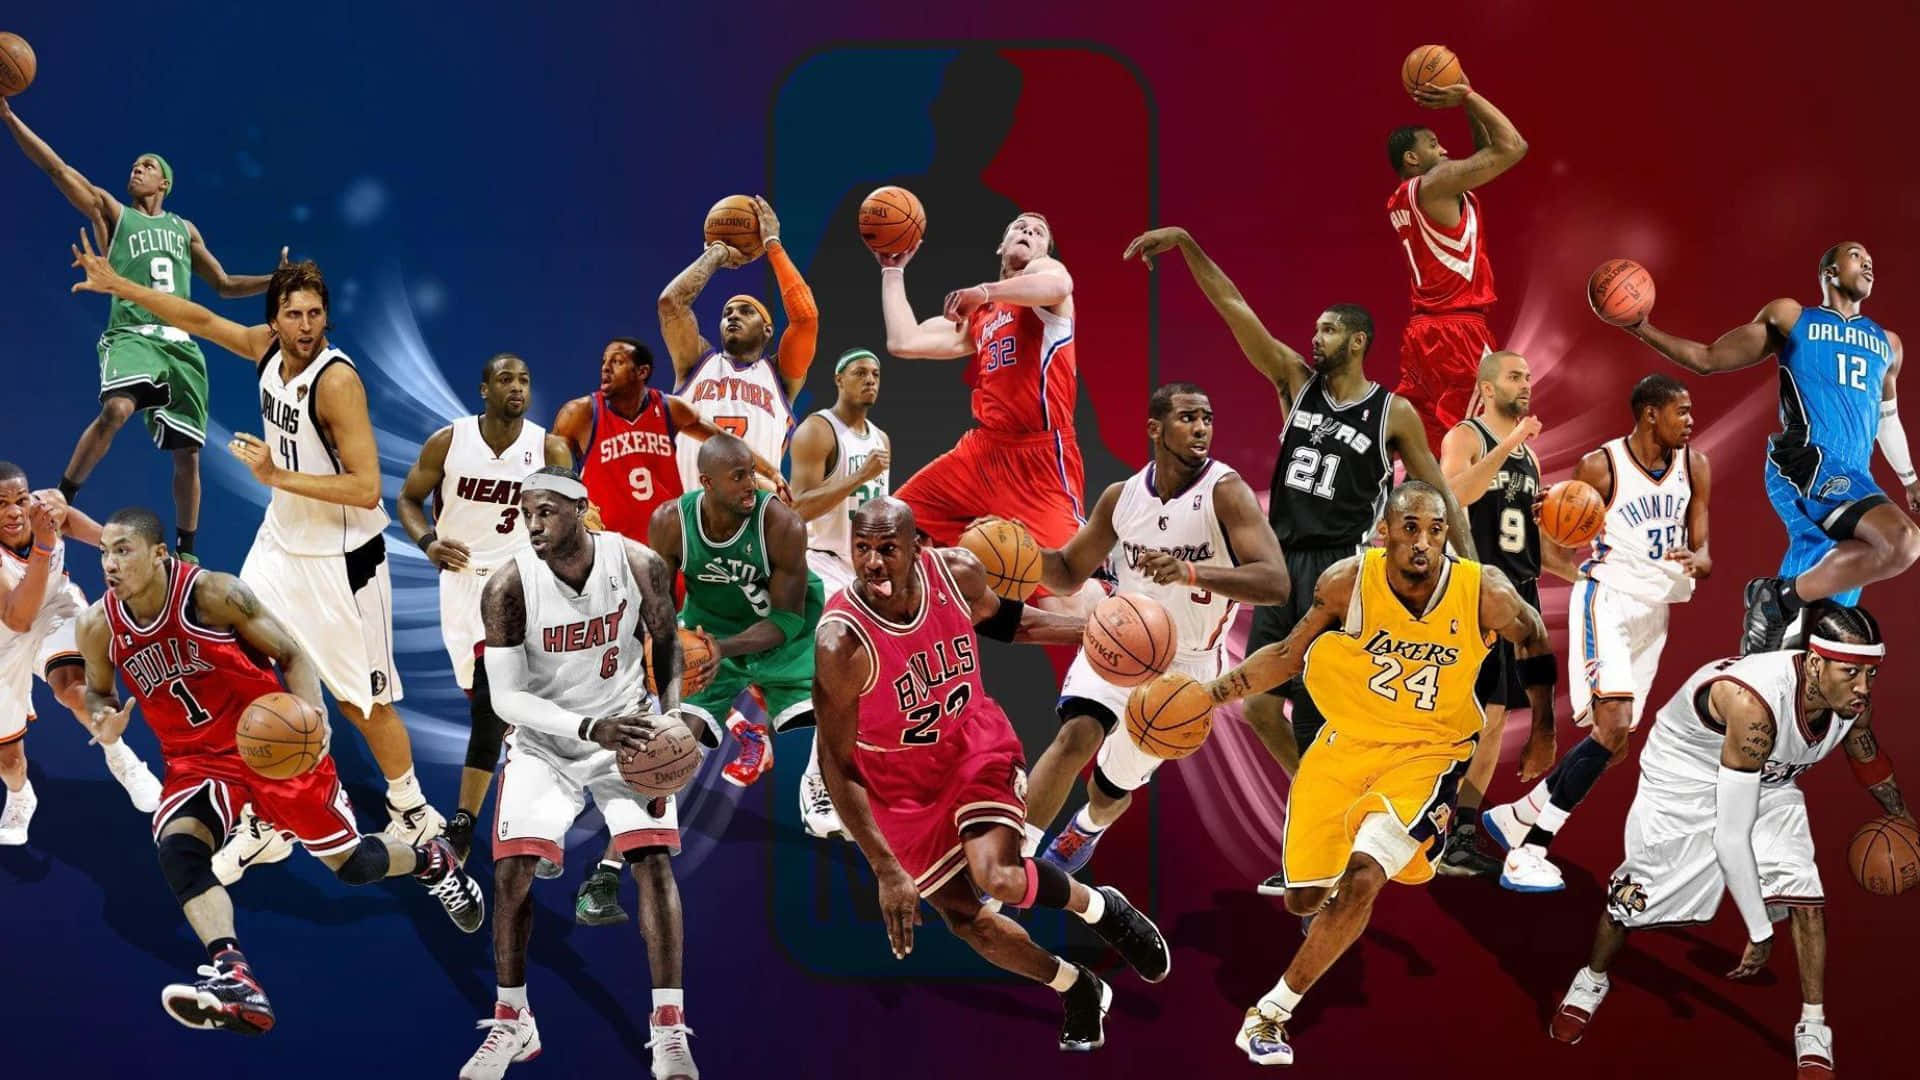 N B A All Star Game Legends Collage Wallpaper